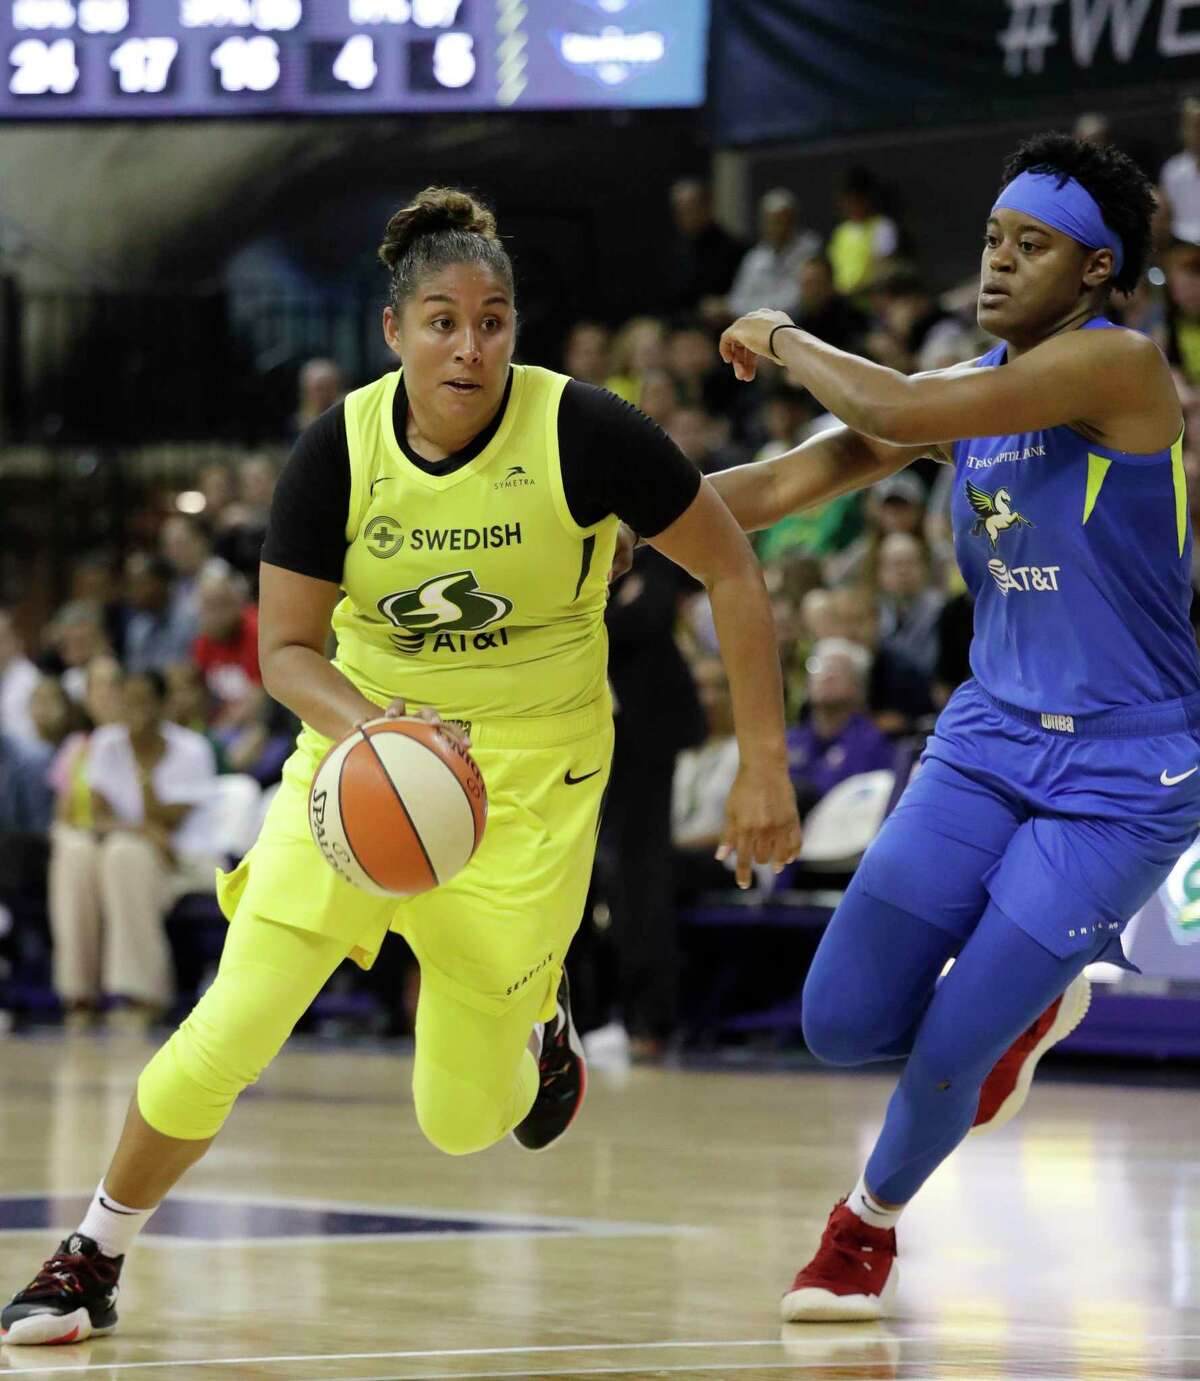 Seattle Storm's Kaleena Mosqueda-Lewis, left, drives past Dallas Wings' Kaela Davis during the second half of a WNBA basketball game Friday, July 12, 2019, in Seattle. Mosqueda-Lewis led the Storm with 18 points in their 95-81 victory. (AP Photo/Elaine Thompson)